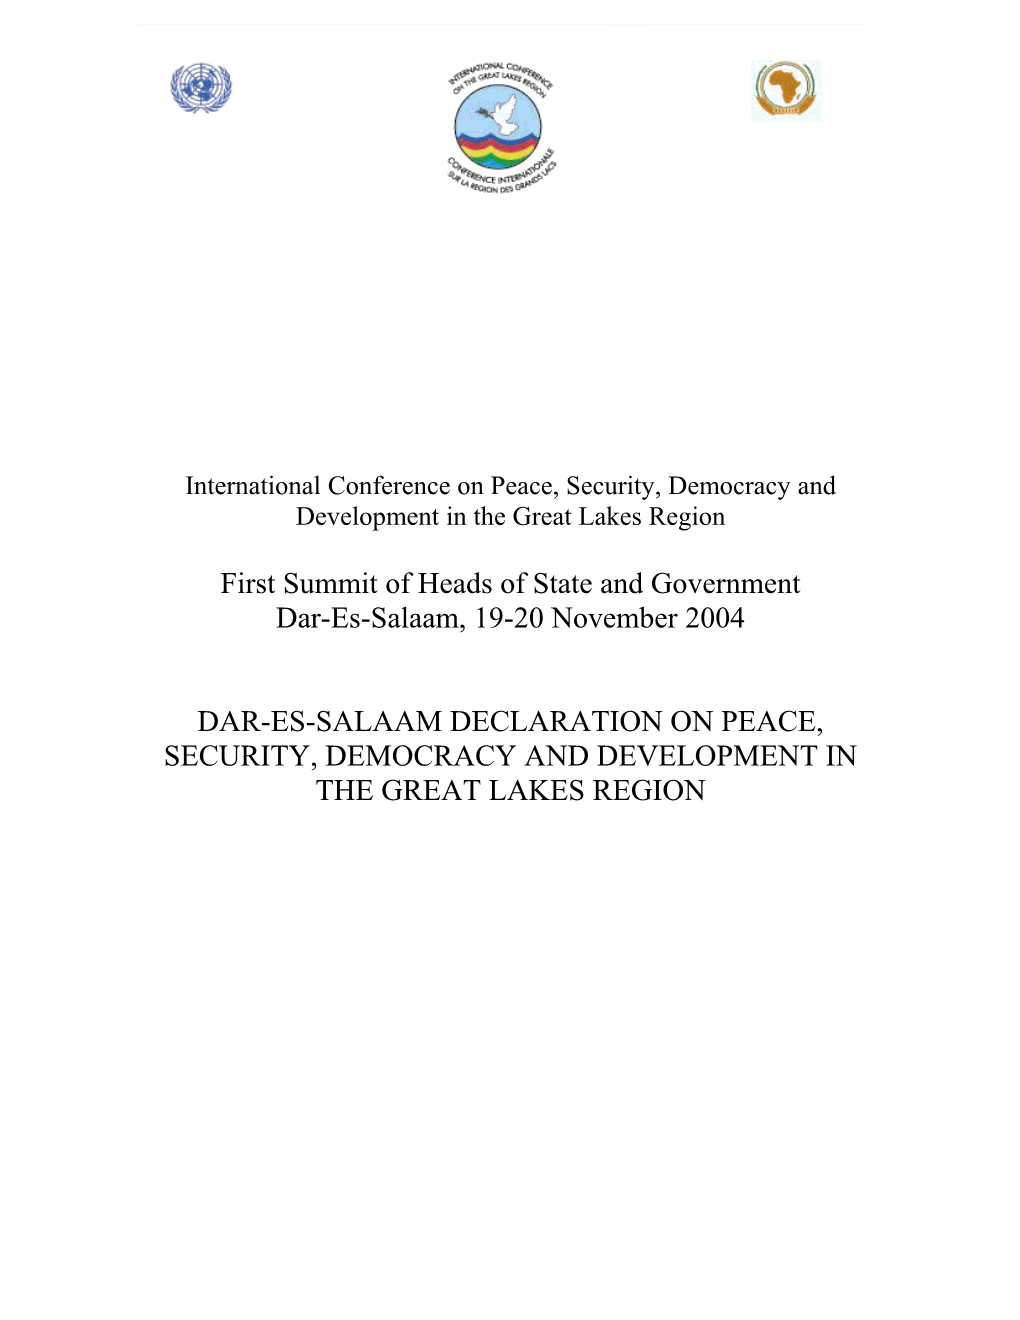 International Conference on Peace, Security, Democracy and Development in the Great Lakes Region